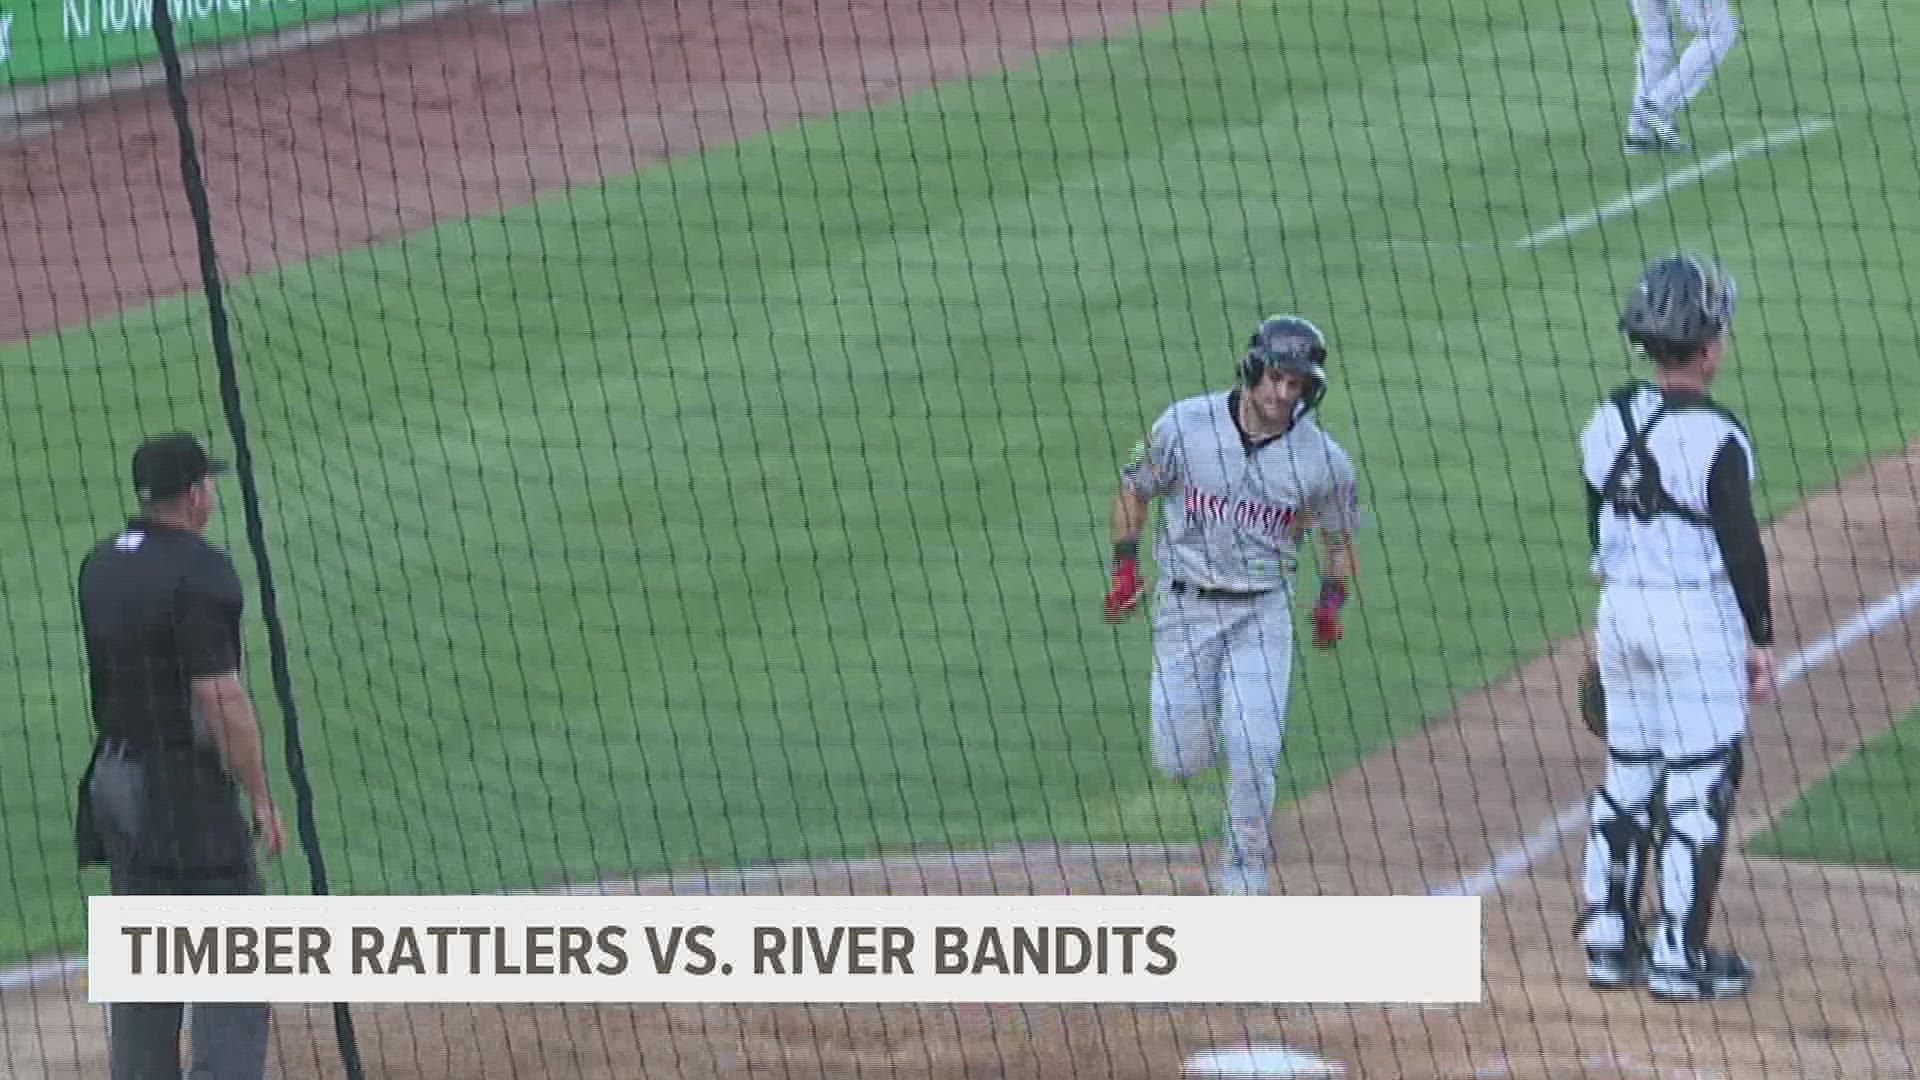 The River Bandits are starting a long stretch of home games off with a loss after heavy offense from the Timber Rattlers.